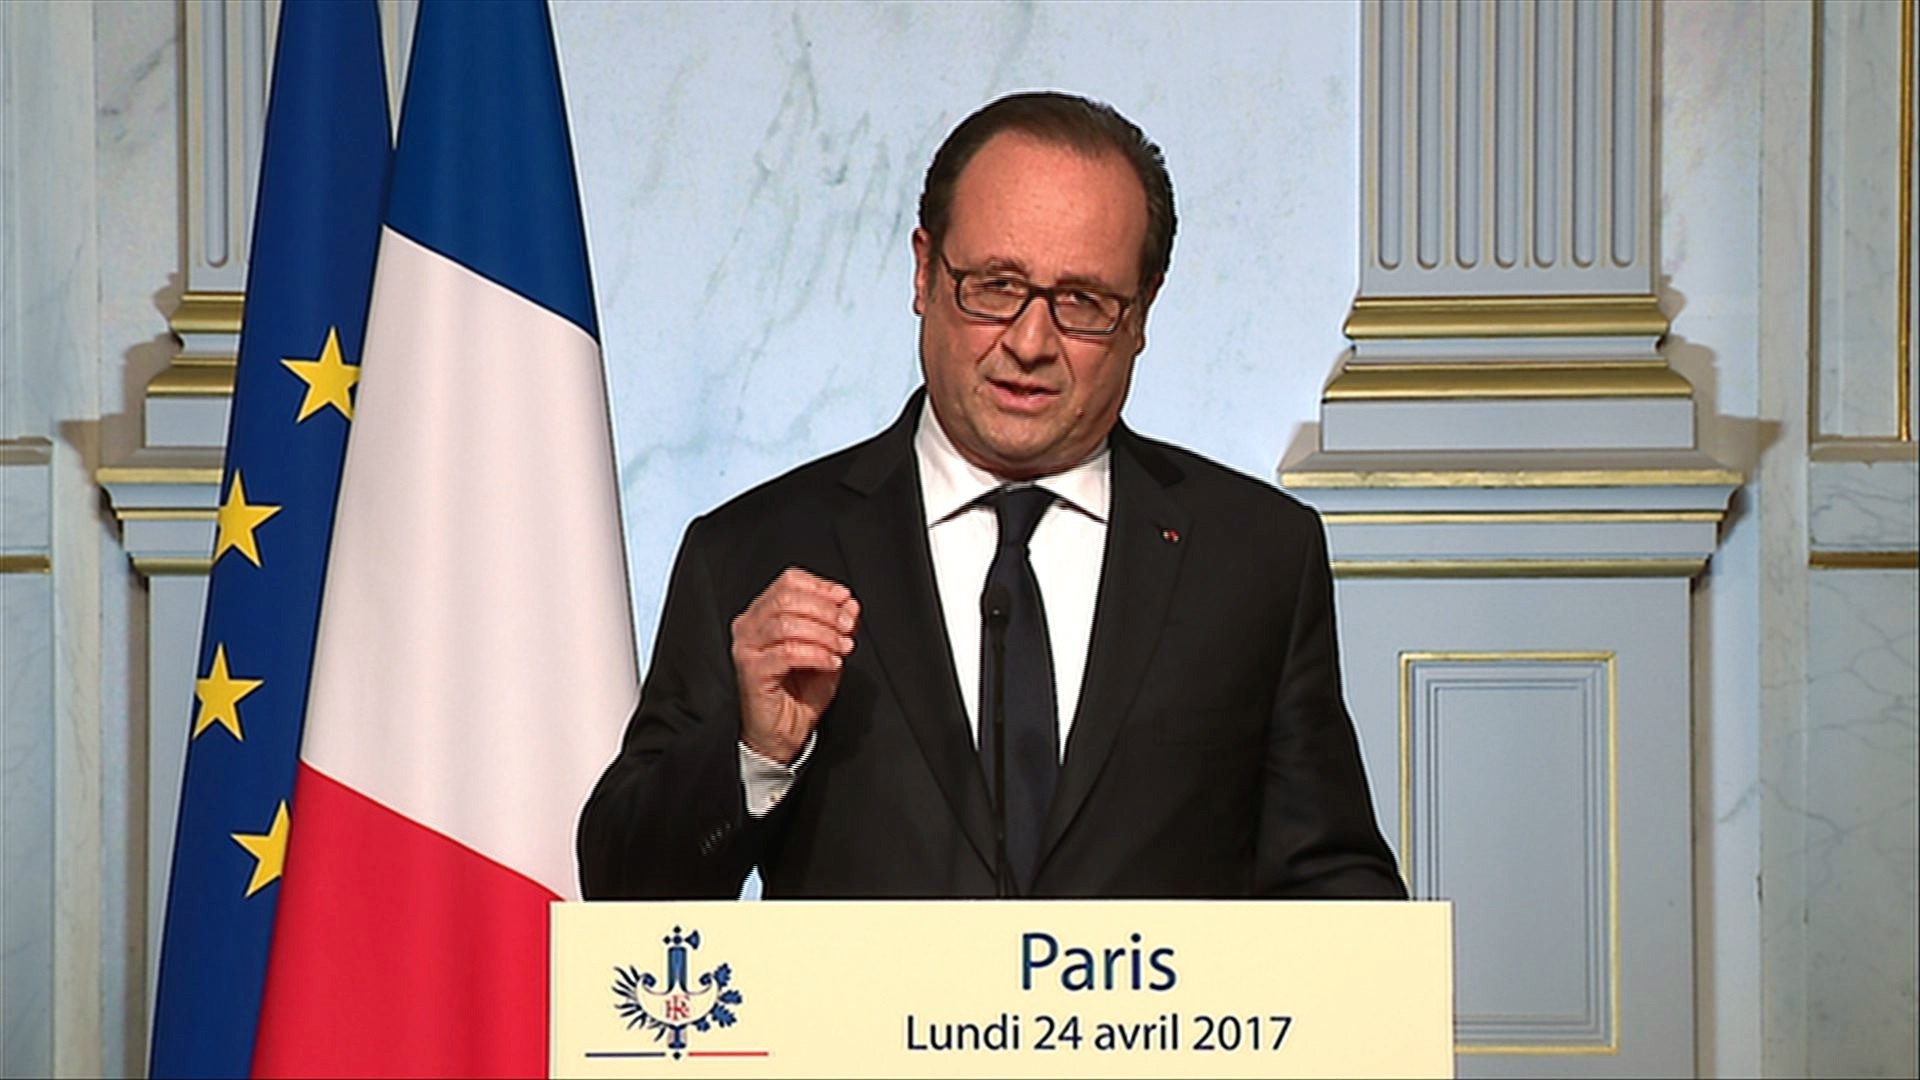 This videograb made on April 24, 2017 shows French President Francois Hollande making a statement a day after the results of the first round of the French presidential elections. (AFP Photo)